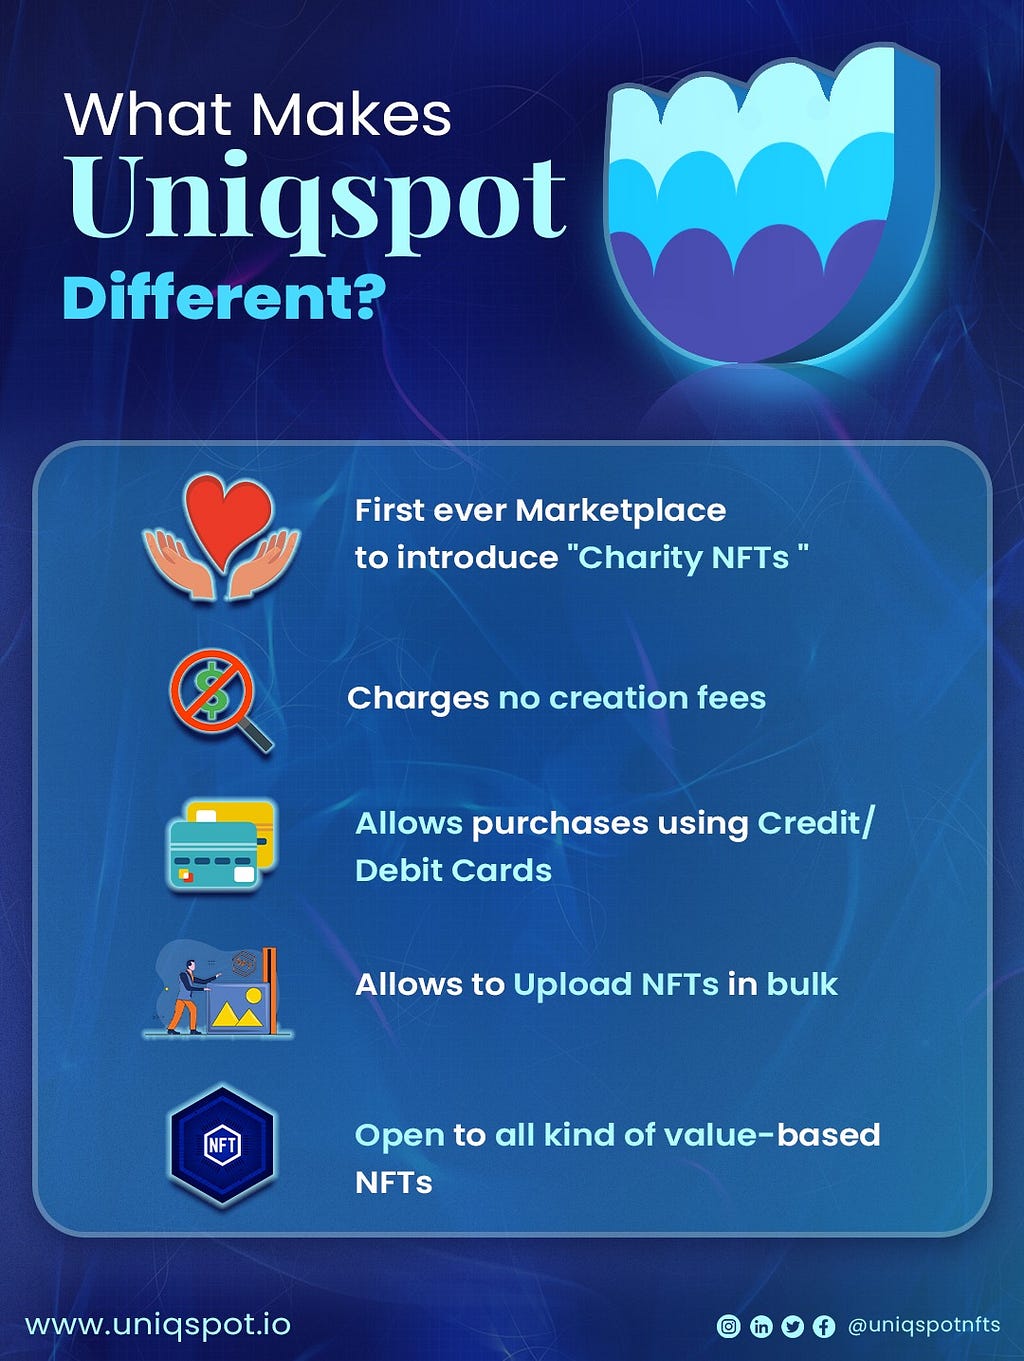 features of upcoming nft marketplace named Uniqspot